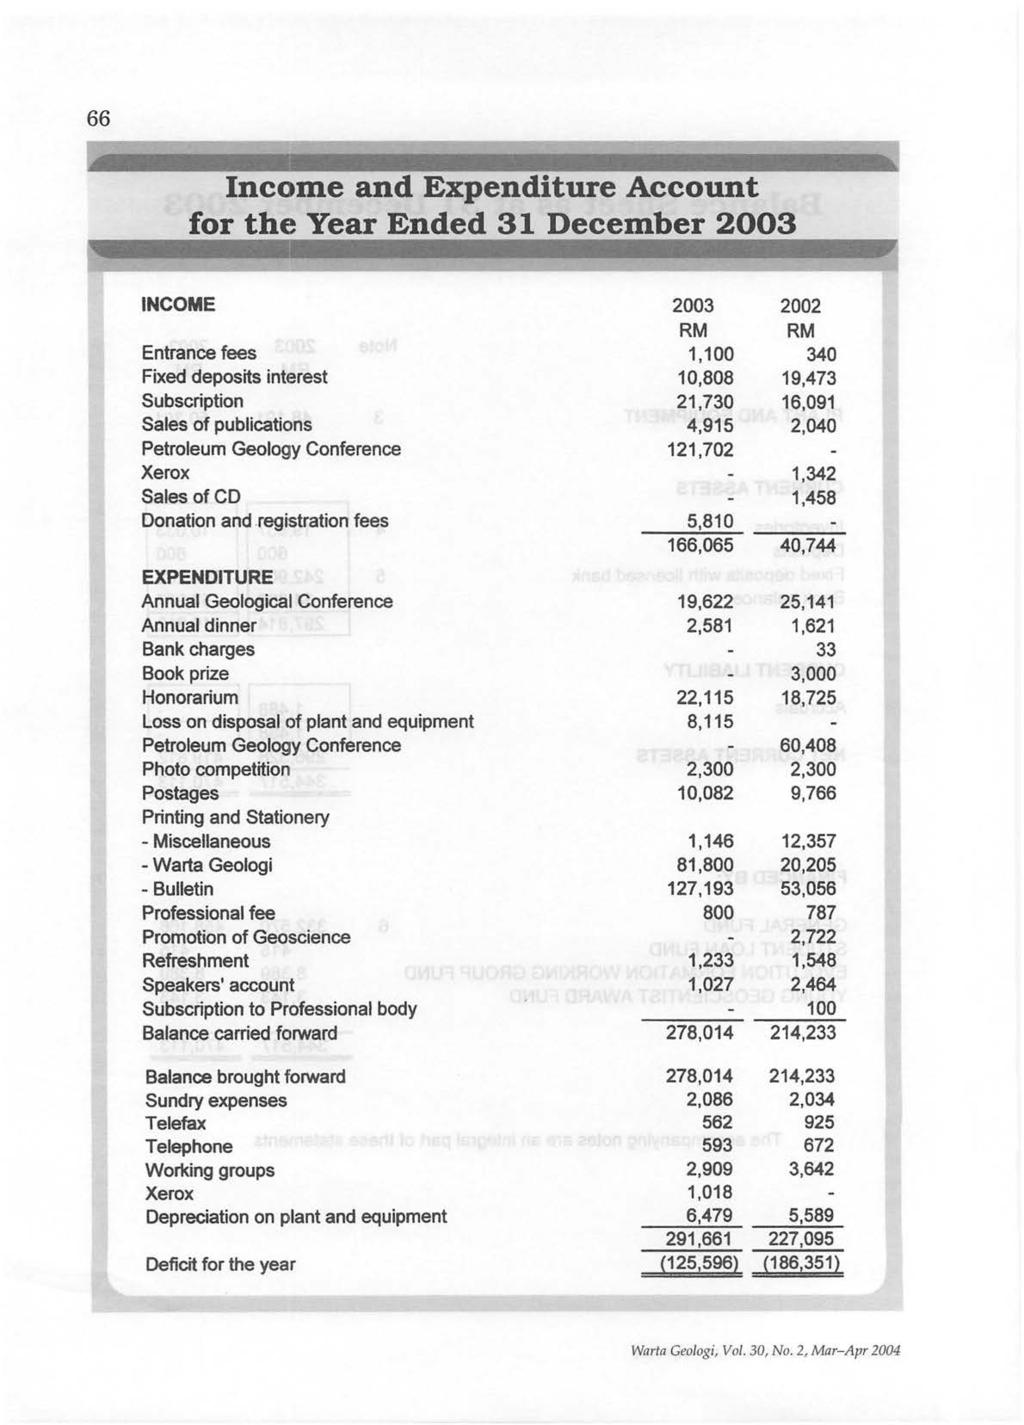 66 Income and Expenditure Account for the Year Ended 31 December 2003 INCOME 2003 2002 RM RM Entrance fees 1,100 340 Fixed deposits interest 10,808 19,473 Subscription 21,730 16,091 Sales of